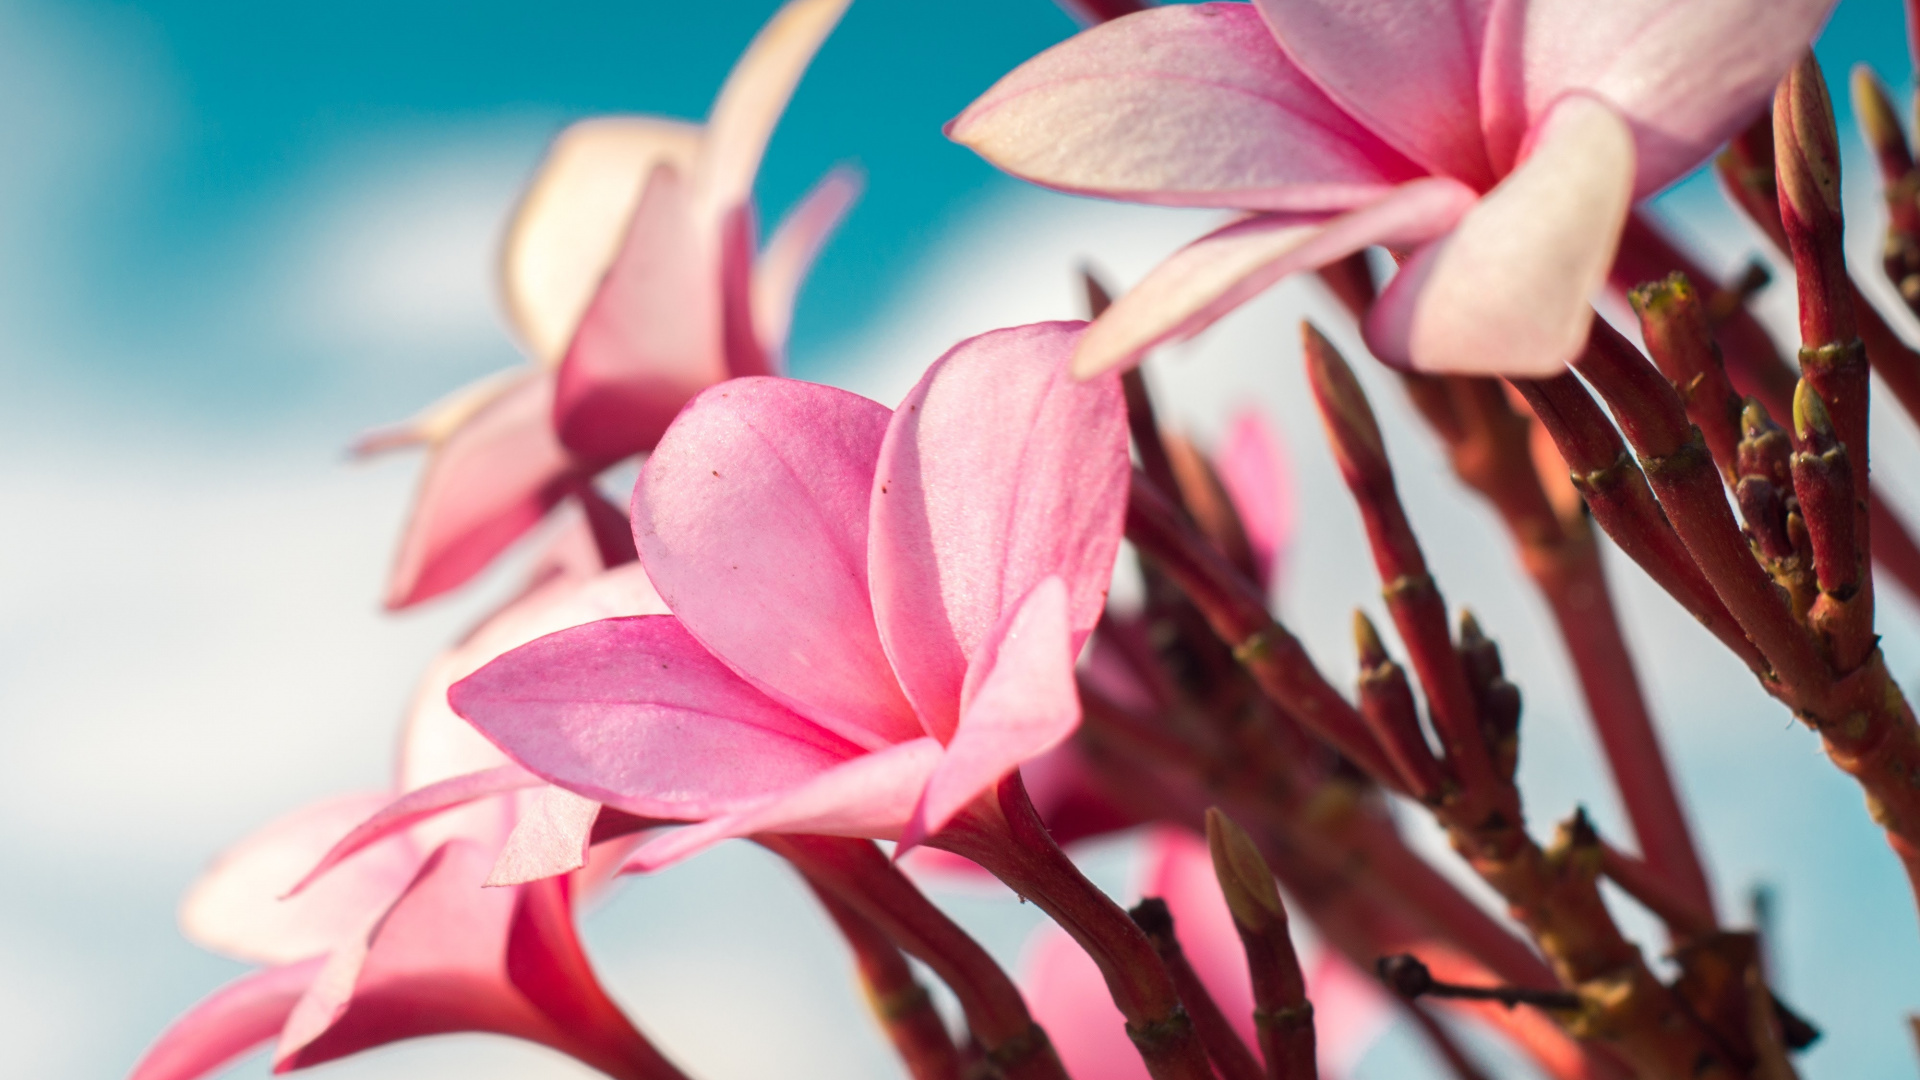 Pink and White Flower in Close up Photography. Wallpaper in 1920x1080 Resolution